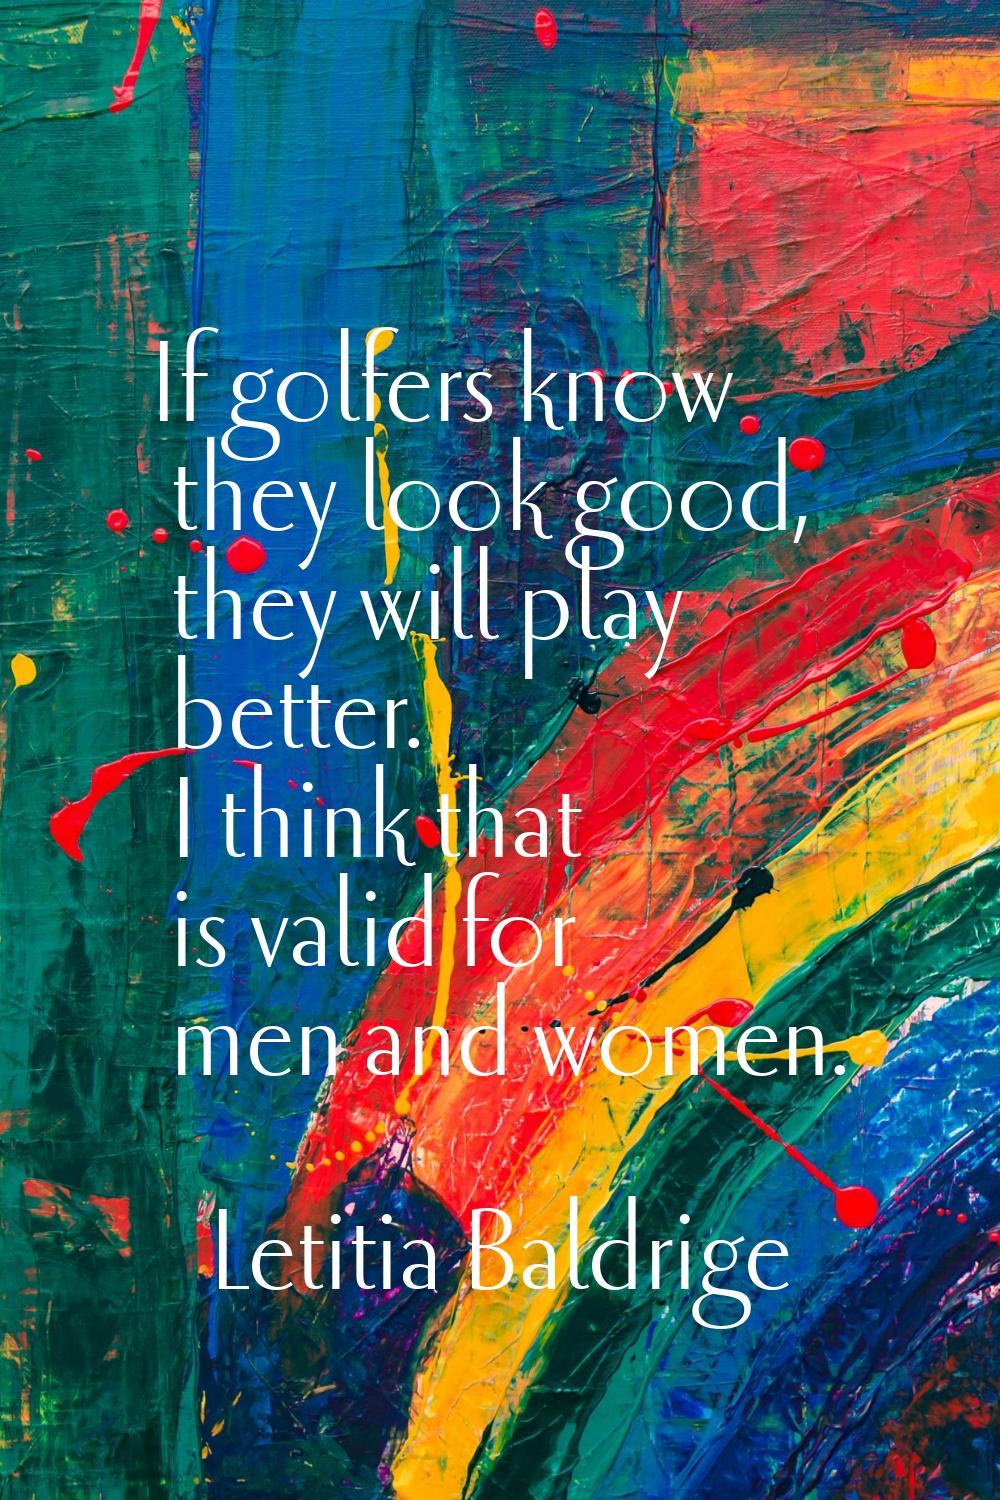 If golfers know they look good, they will play better. I think that is valid for men and women.